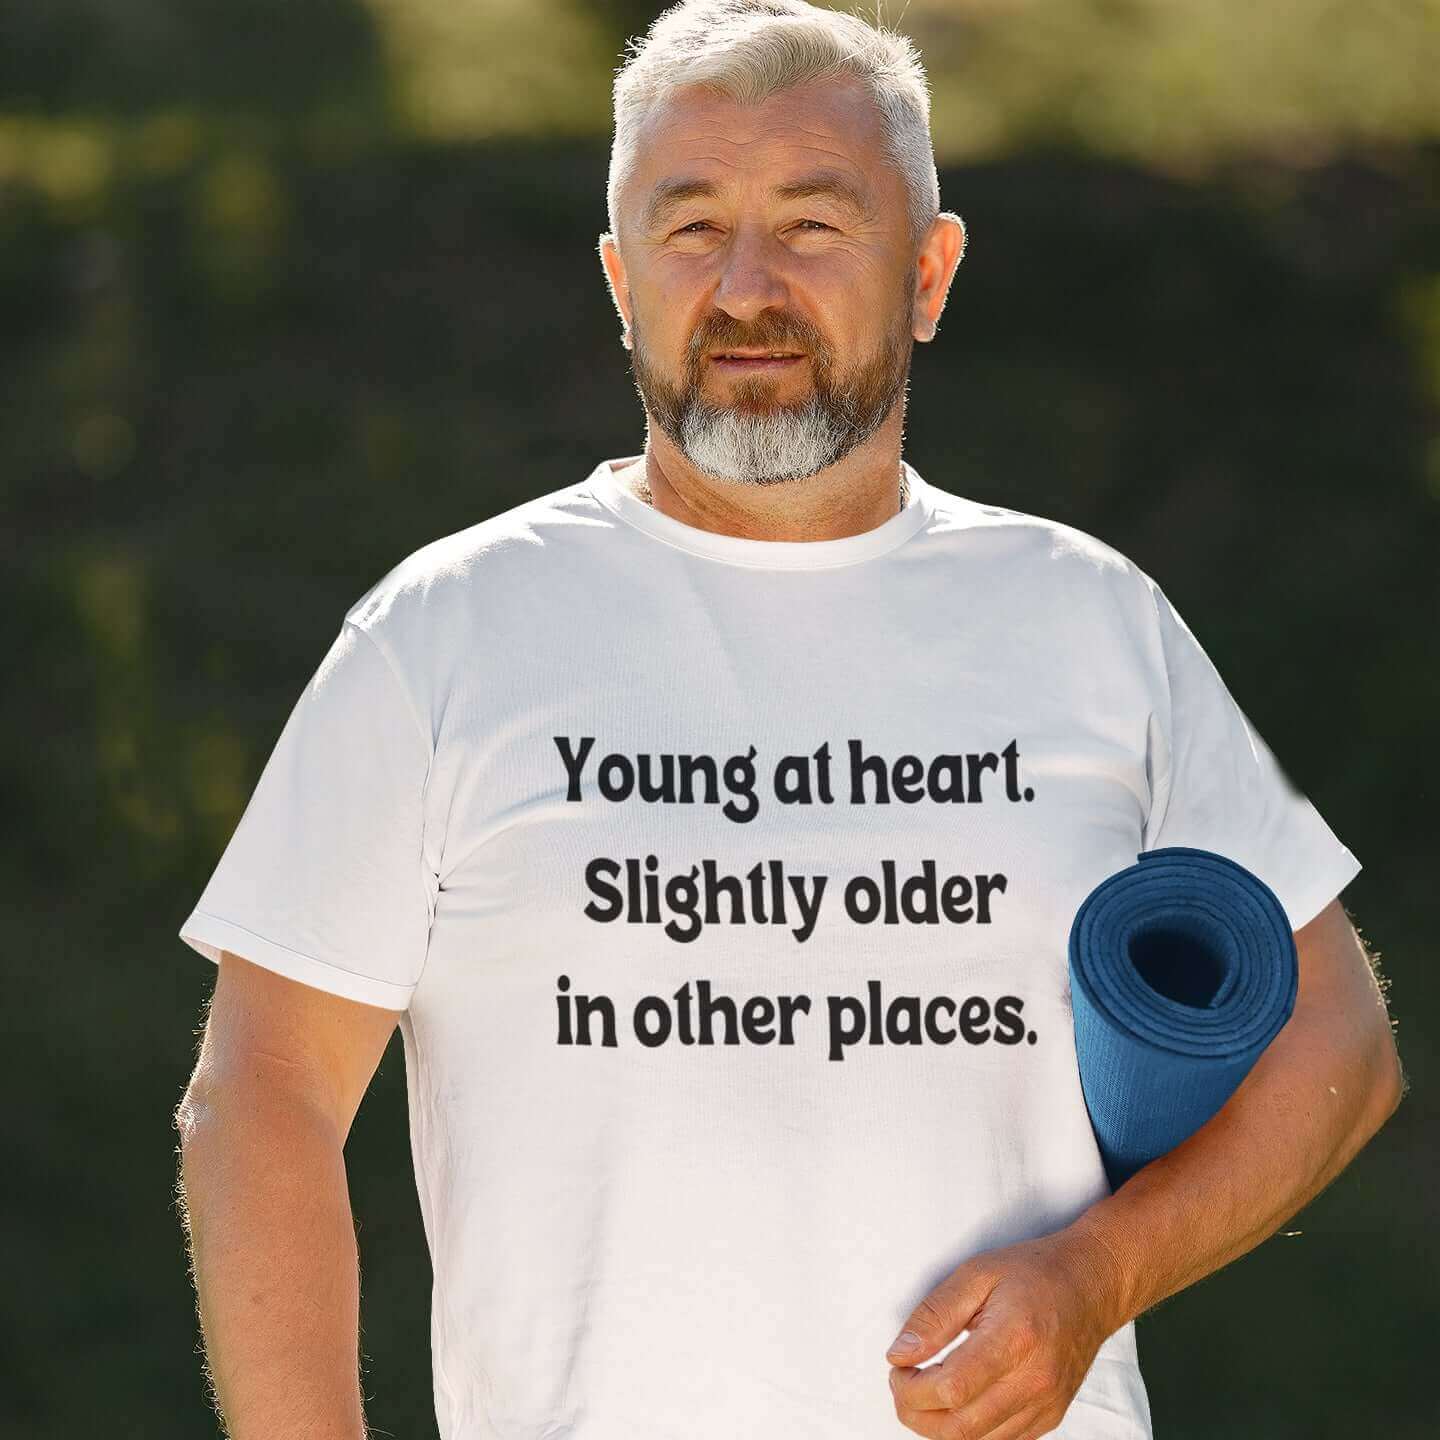 Older man carrying yoga mat wearing a white t-shirt with the words Young at heart, slightly older in other places printed on the front.